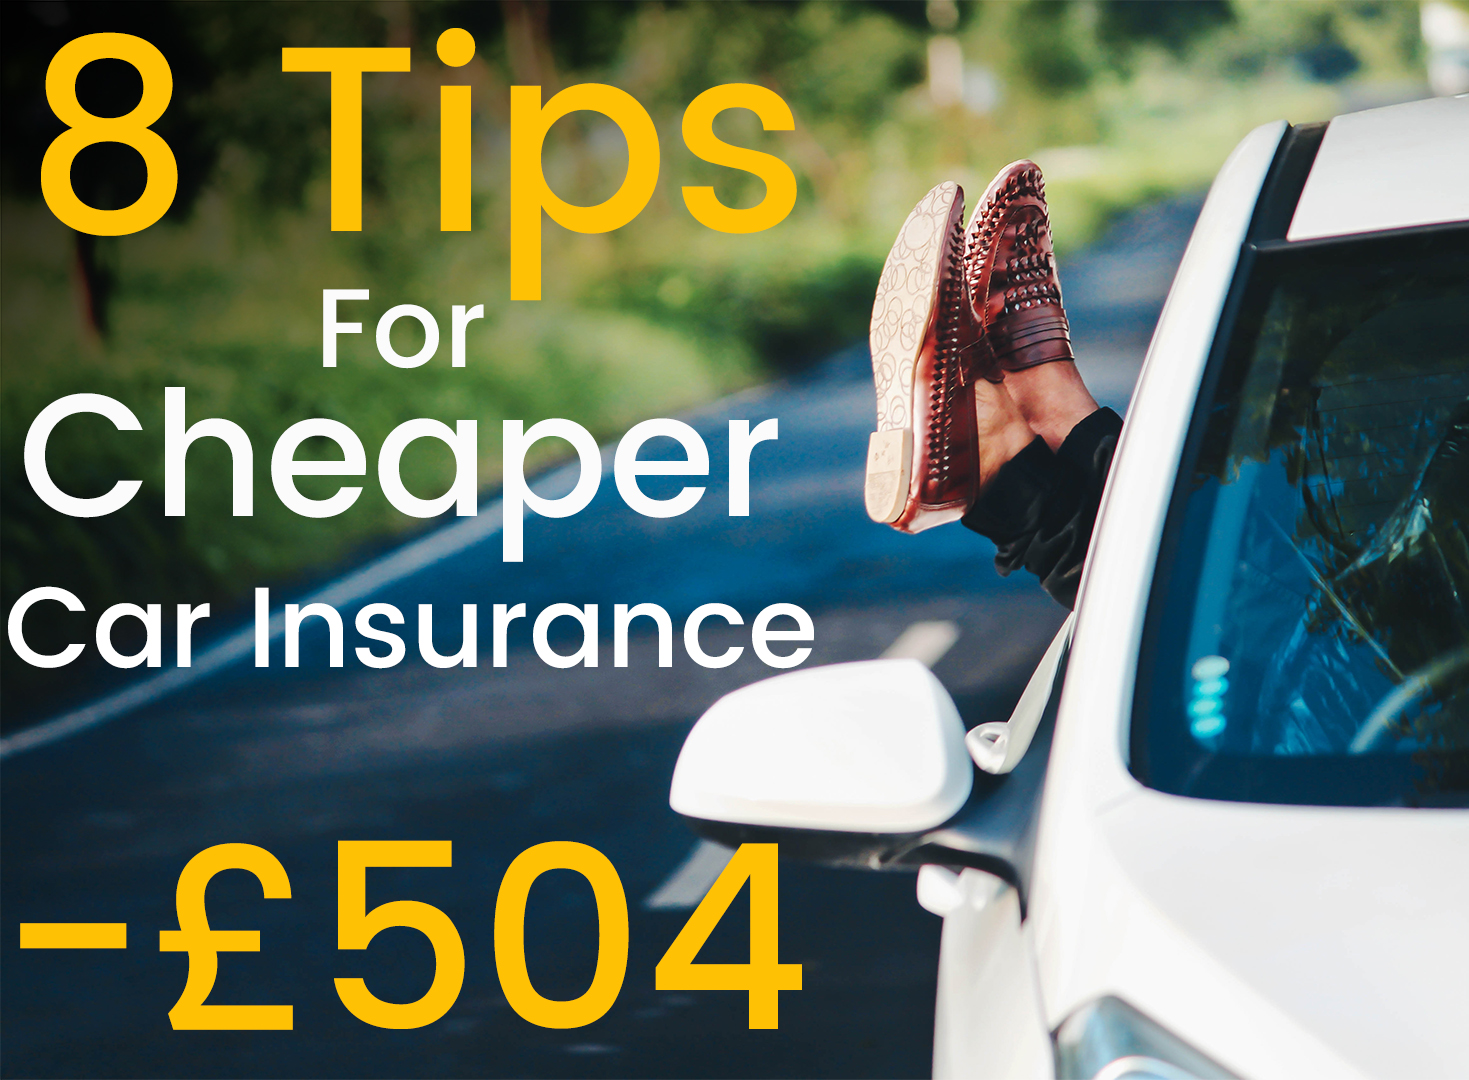 10 Simple Steps Reduced My Car Insurance By 10% (In Only 10 Minutes